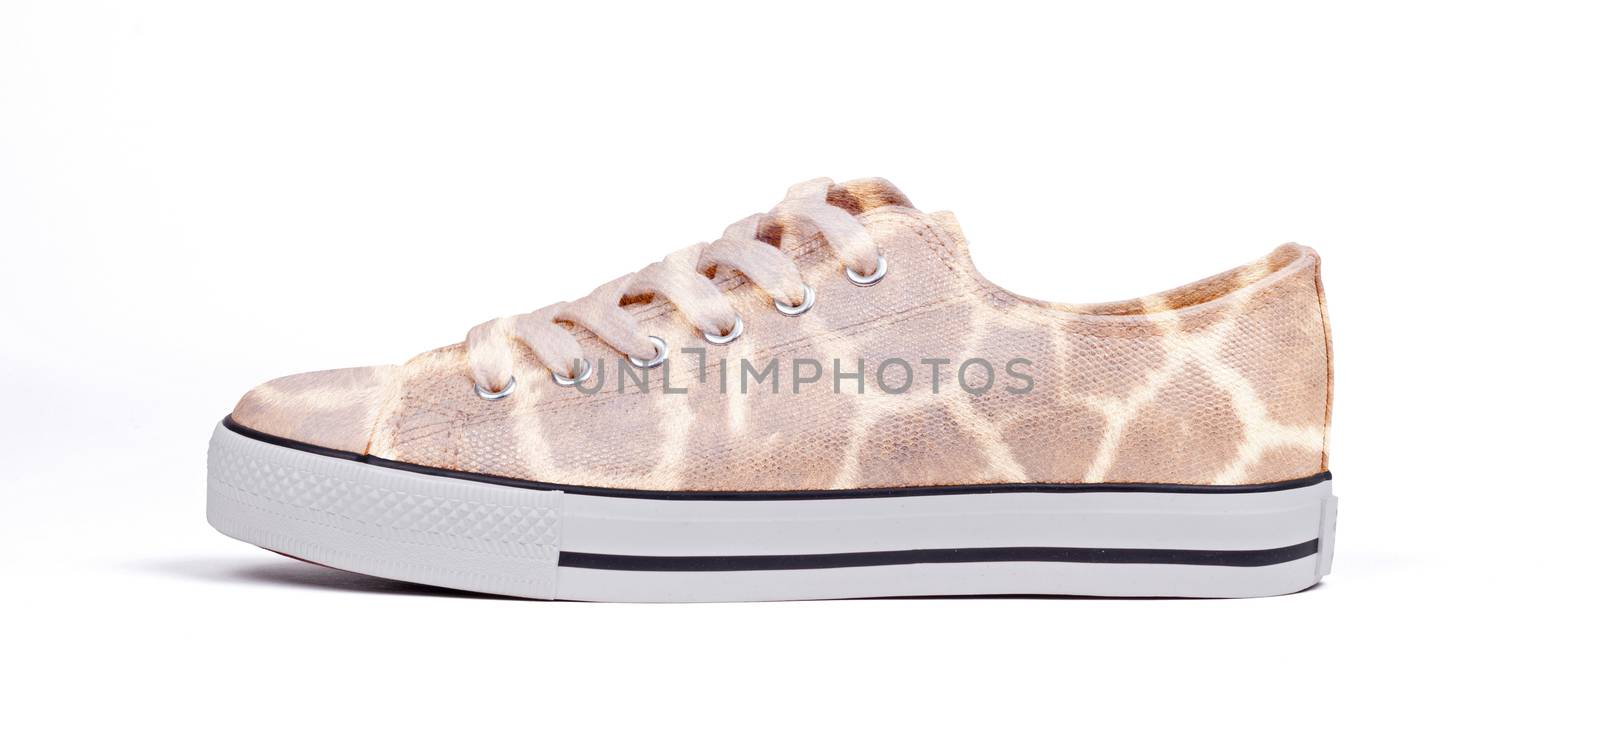 Shoe isolated on white background - Wild life print by michaklootwijk